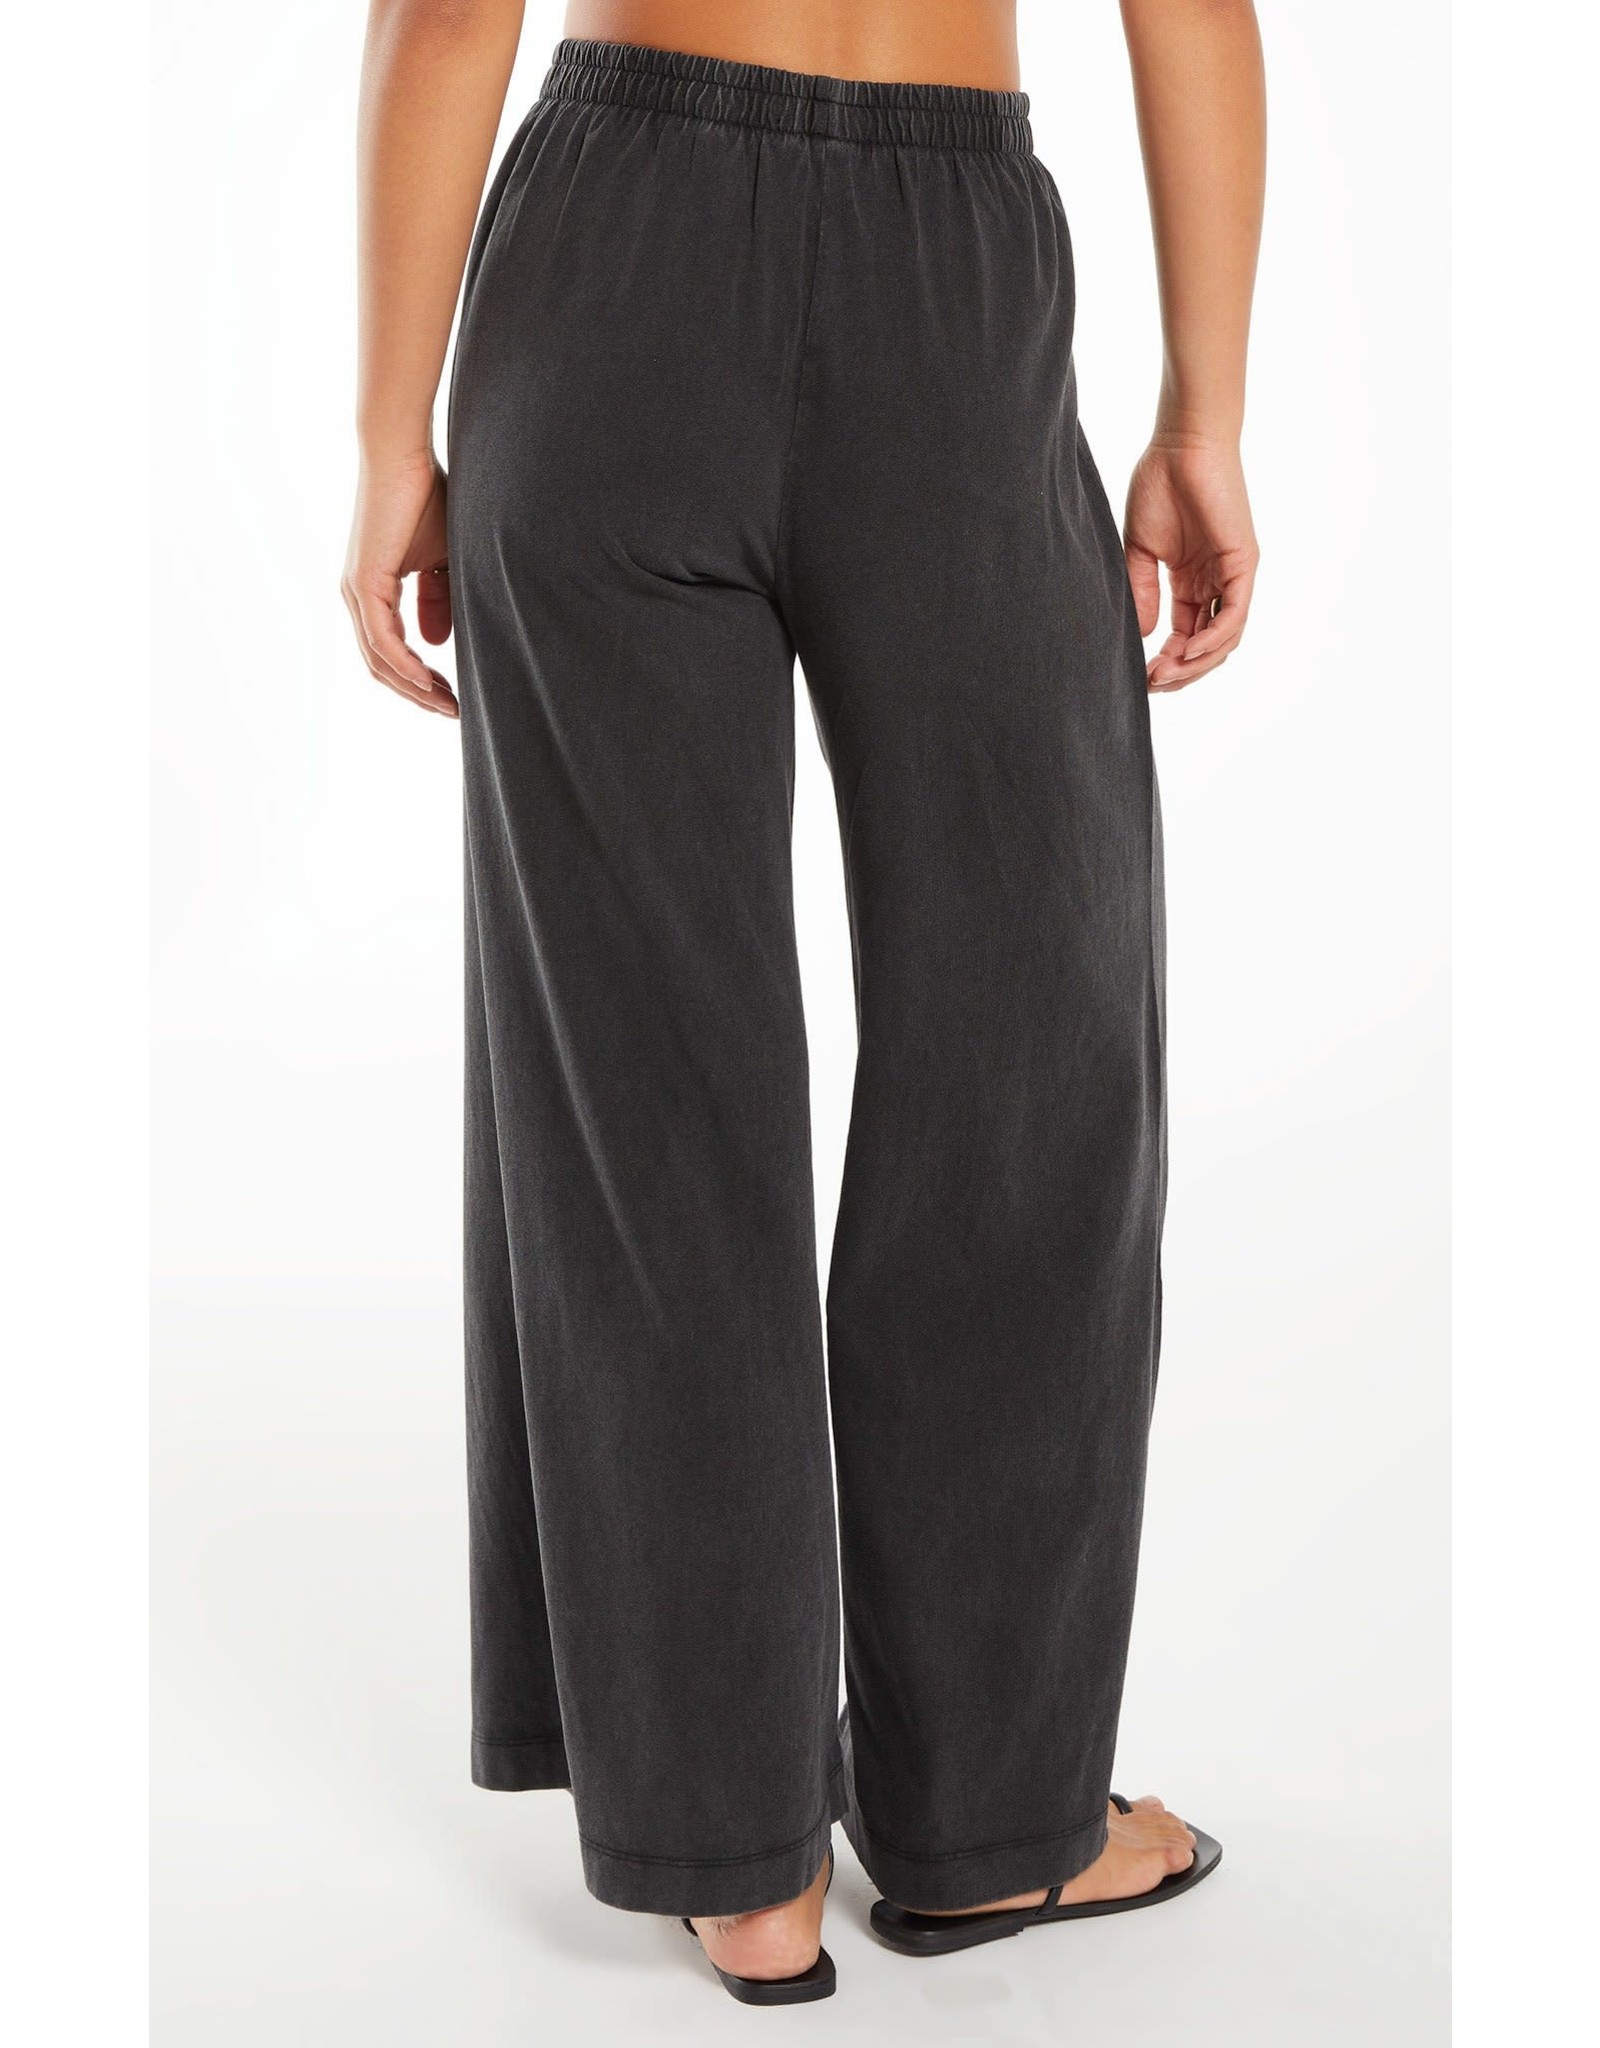 Z supply Z Supply Scout Flare Pant